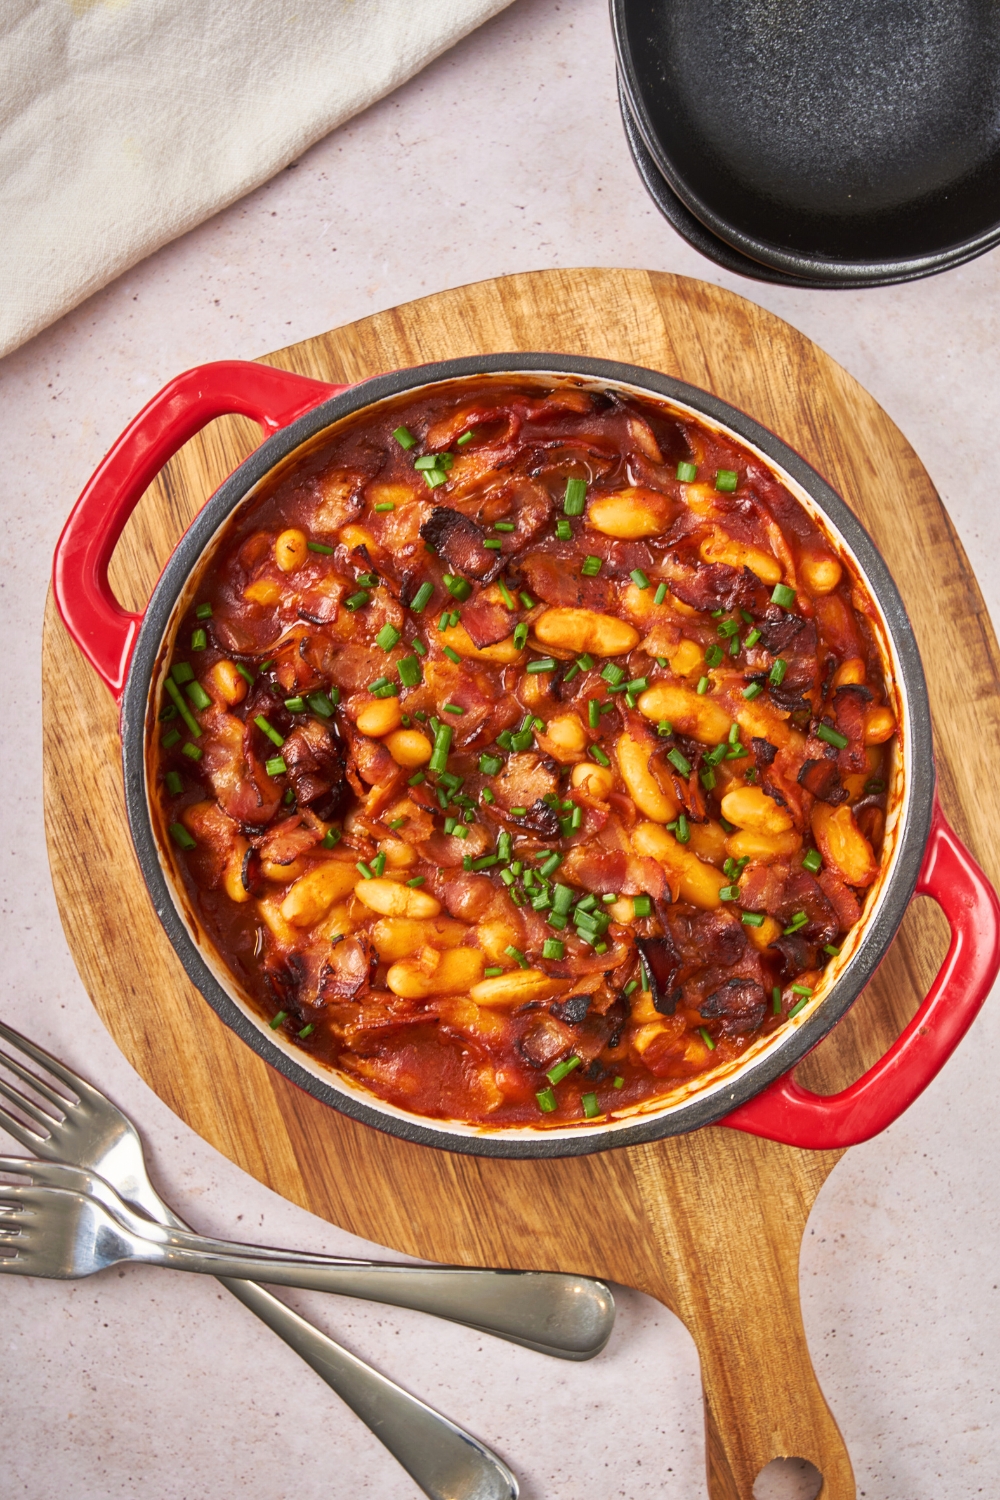 A baked bean casserole in a round baking dish on a wooden cutting board.